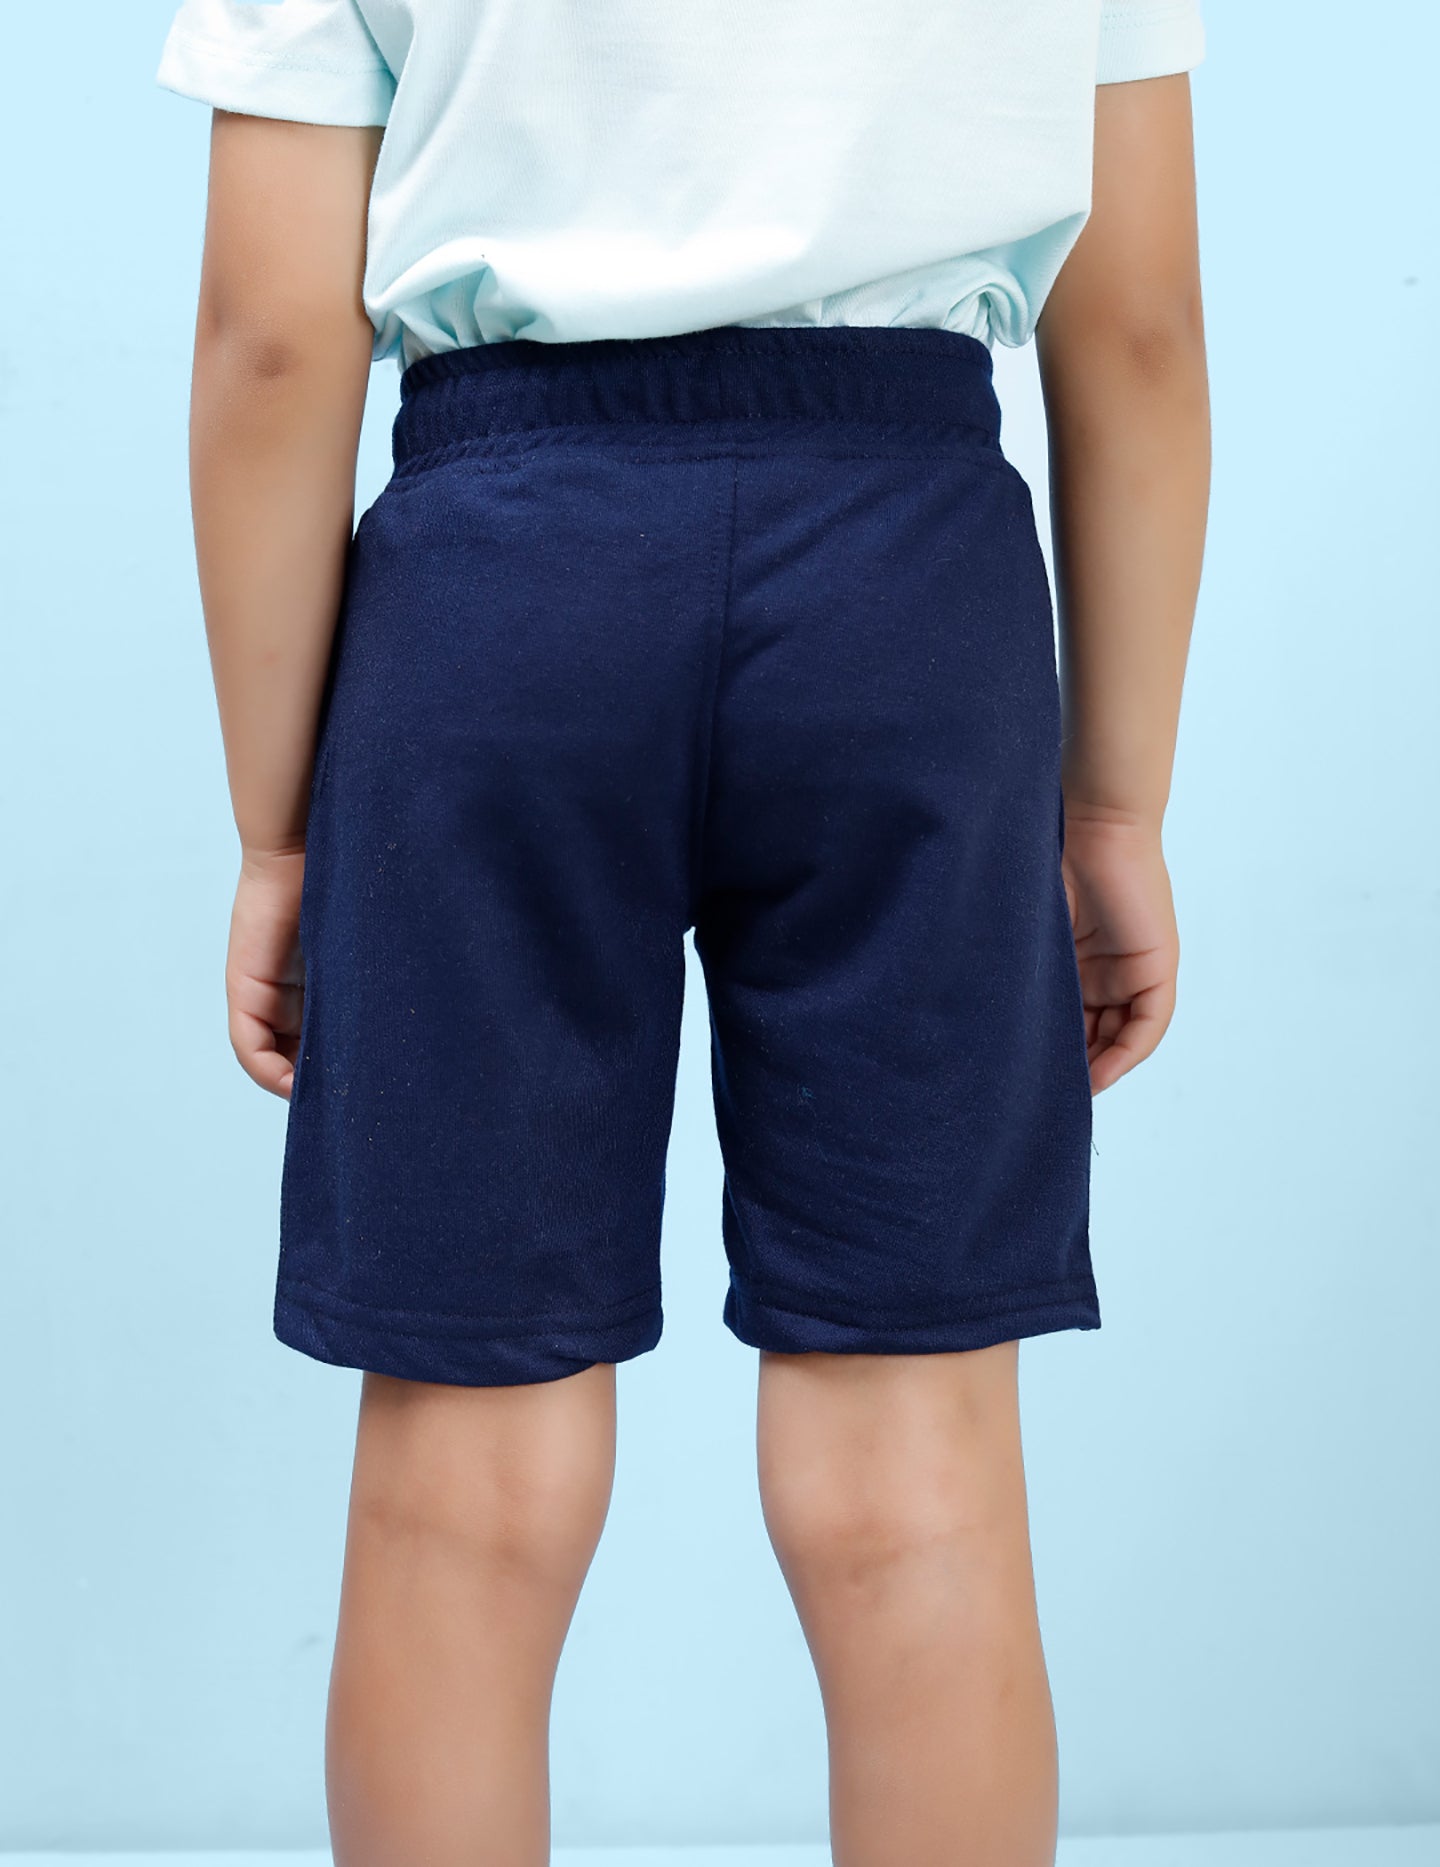 Nusyl colourful lines  Printed Navy Blue Boys Shorts